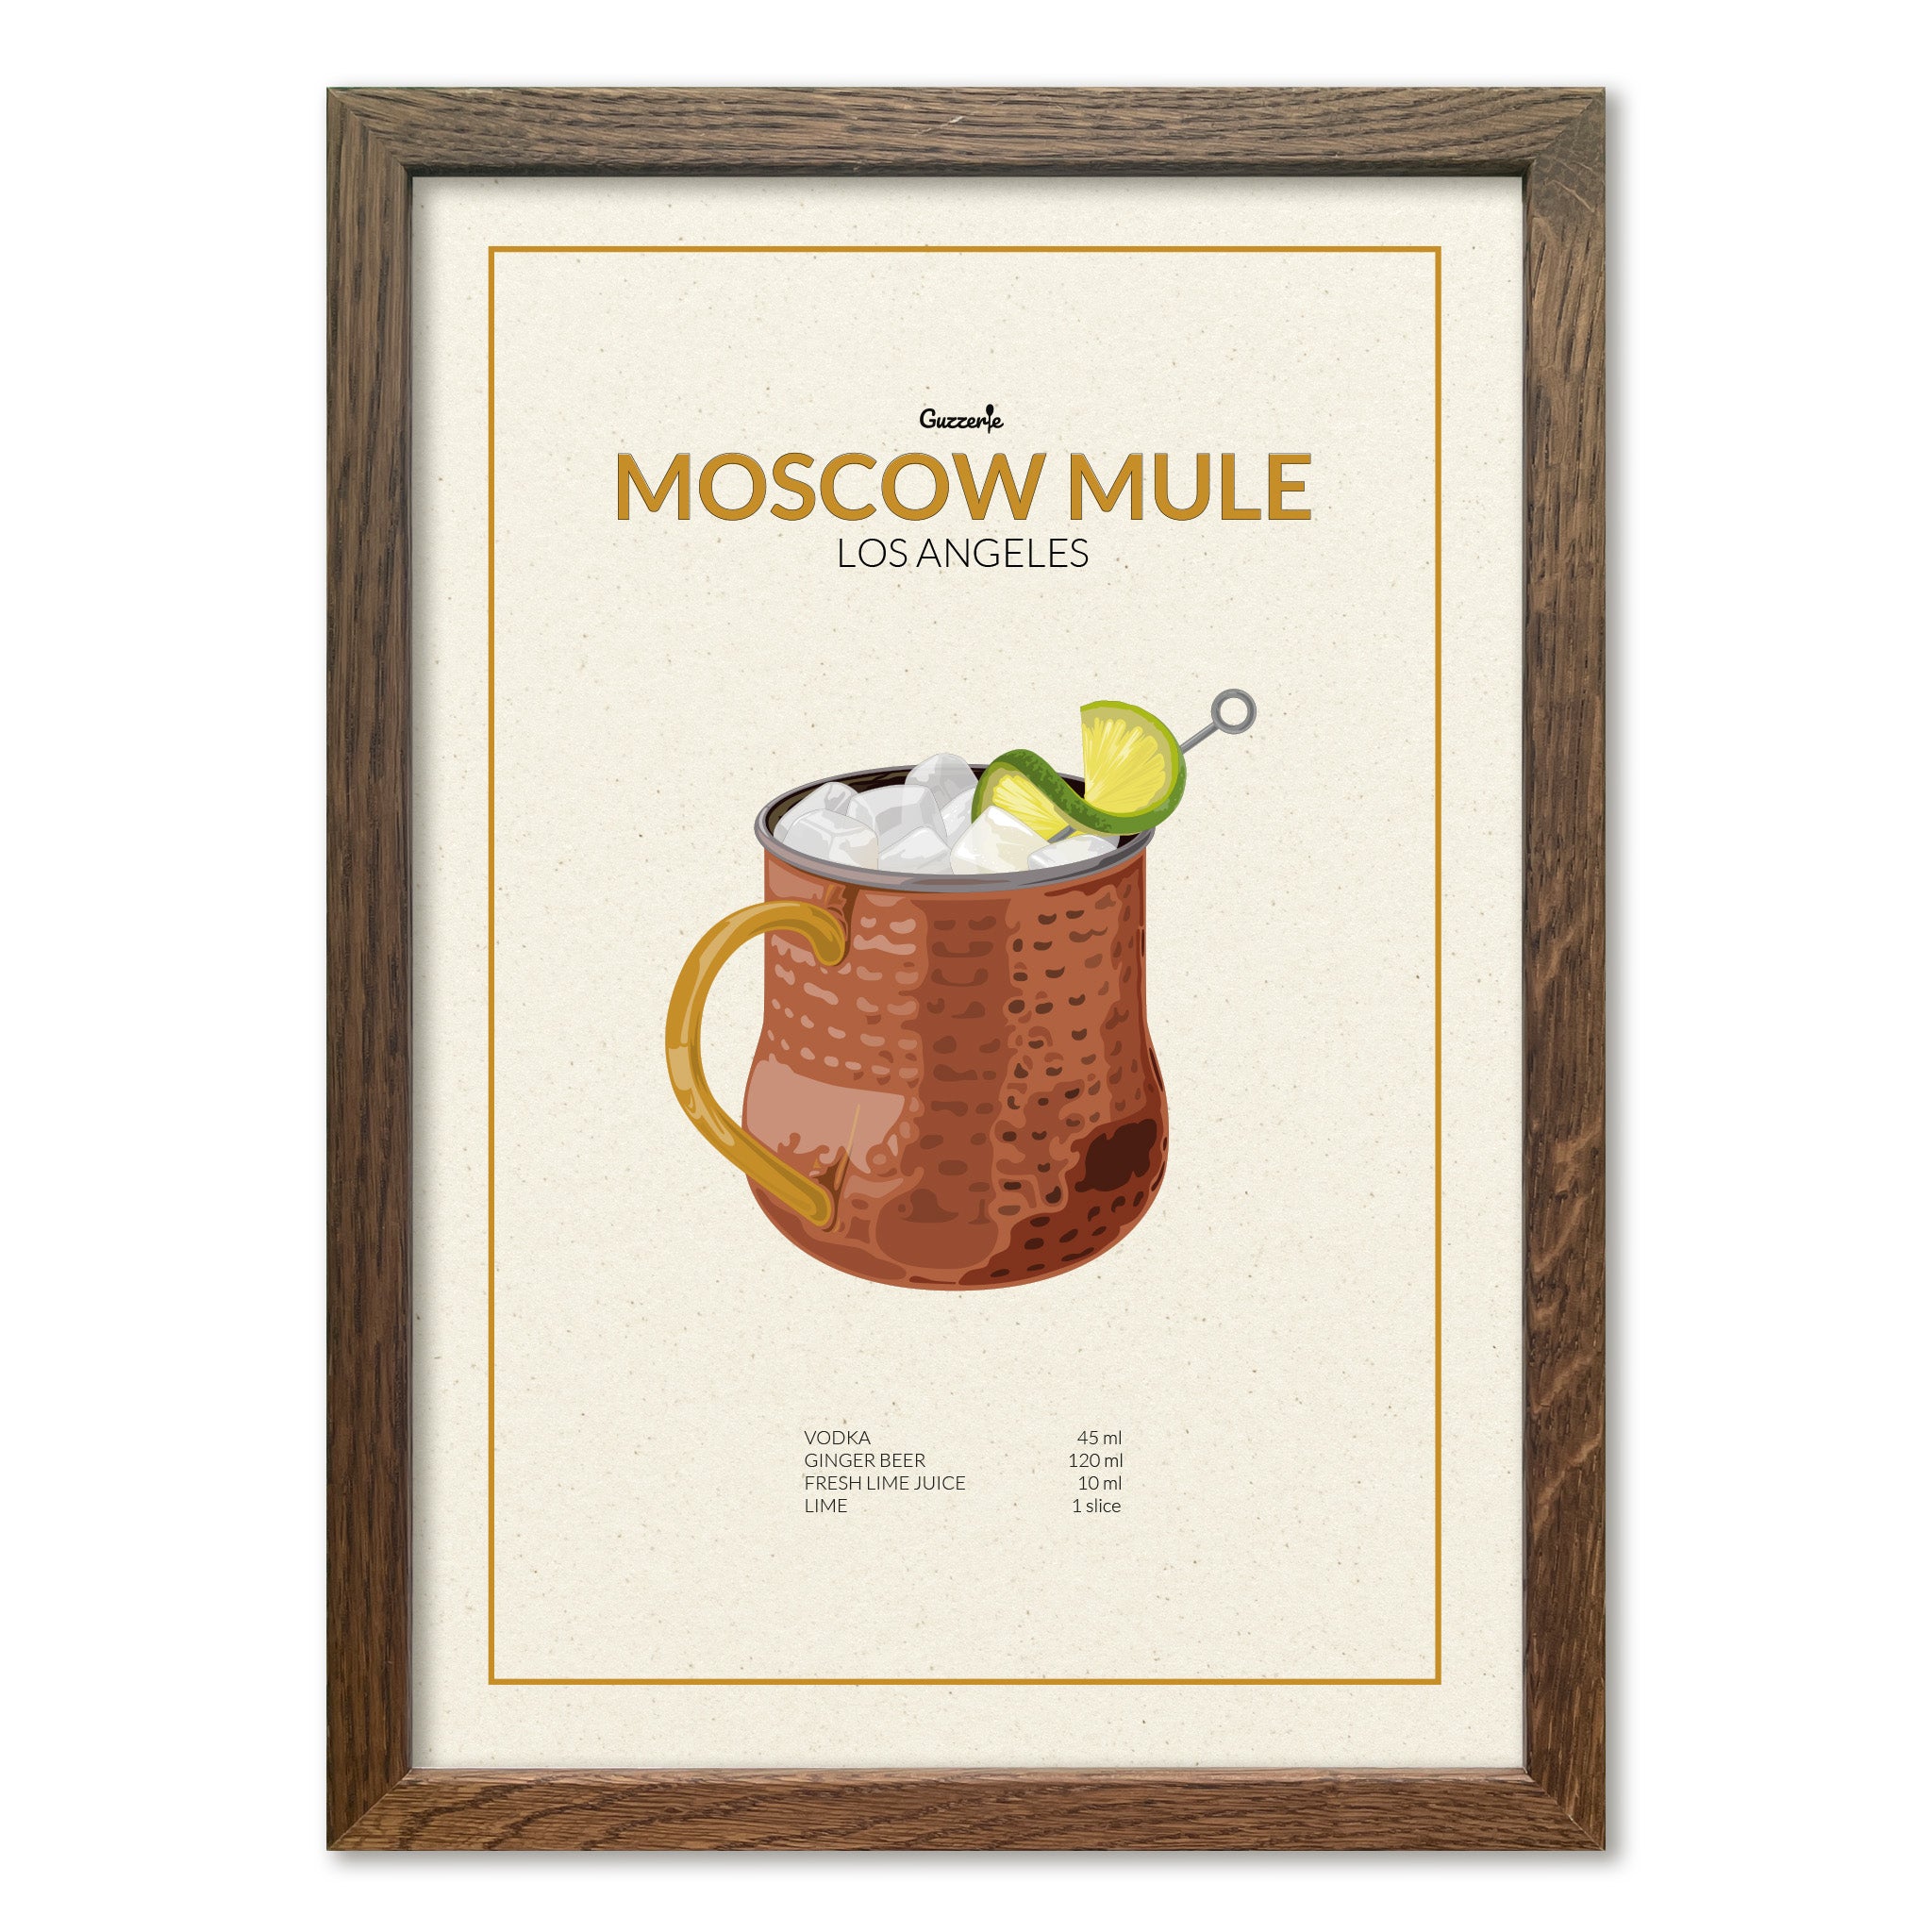 Iconic Poster of Moscow Mule Cocktail | Guzzerie